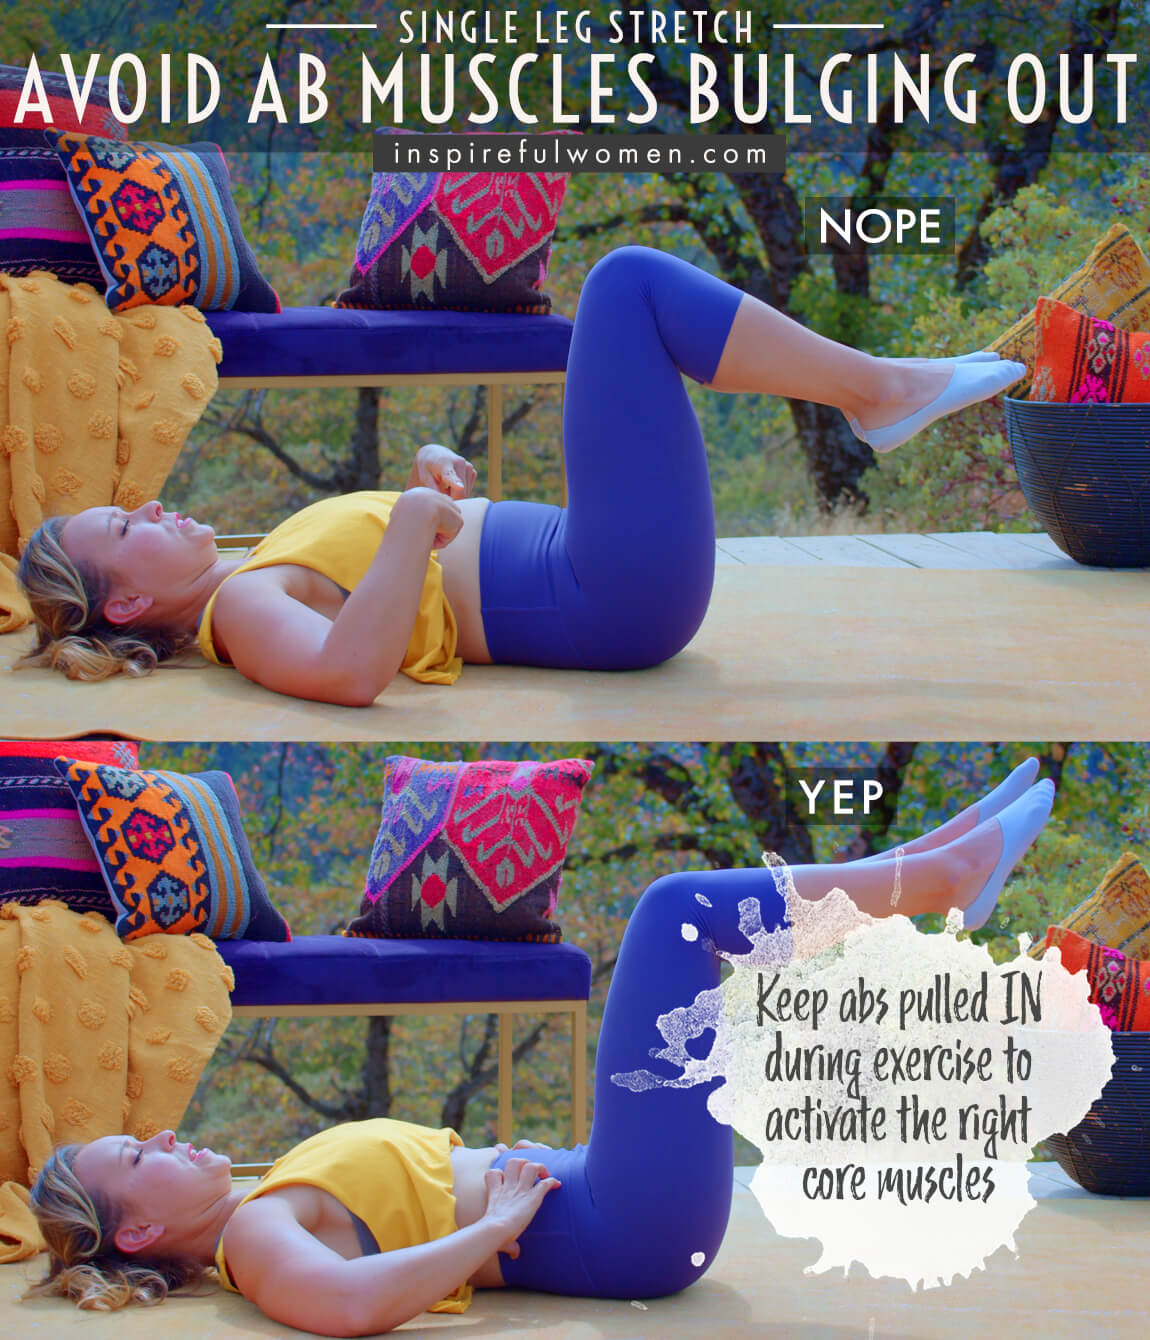 avoid-ab-muscles-bulging-out-single-leg-stretch-pilates-core-exercise-proper-form